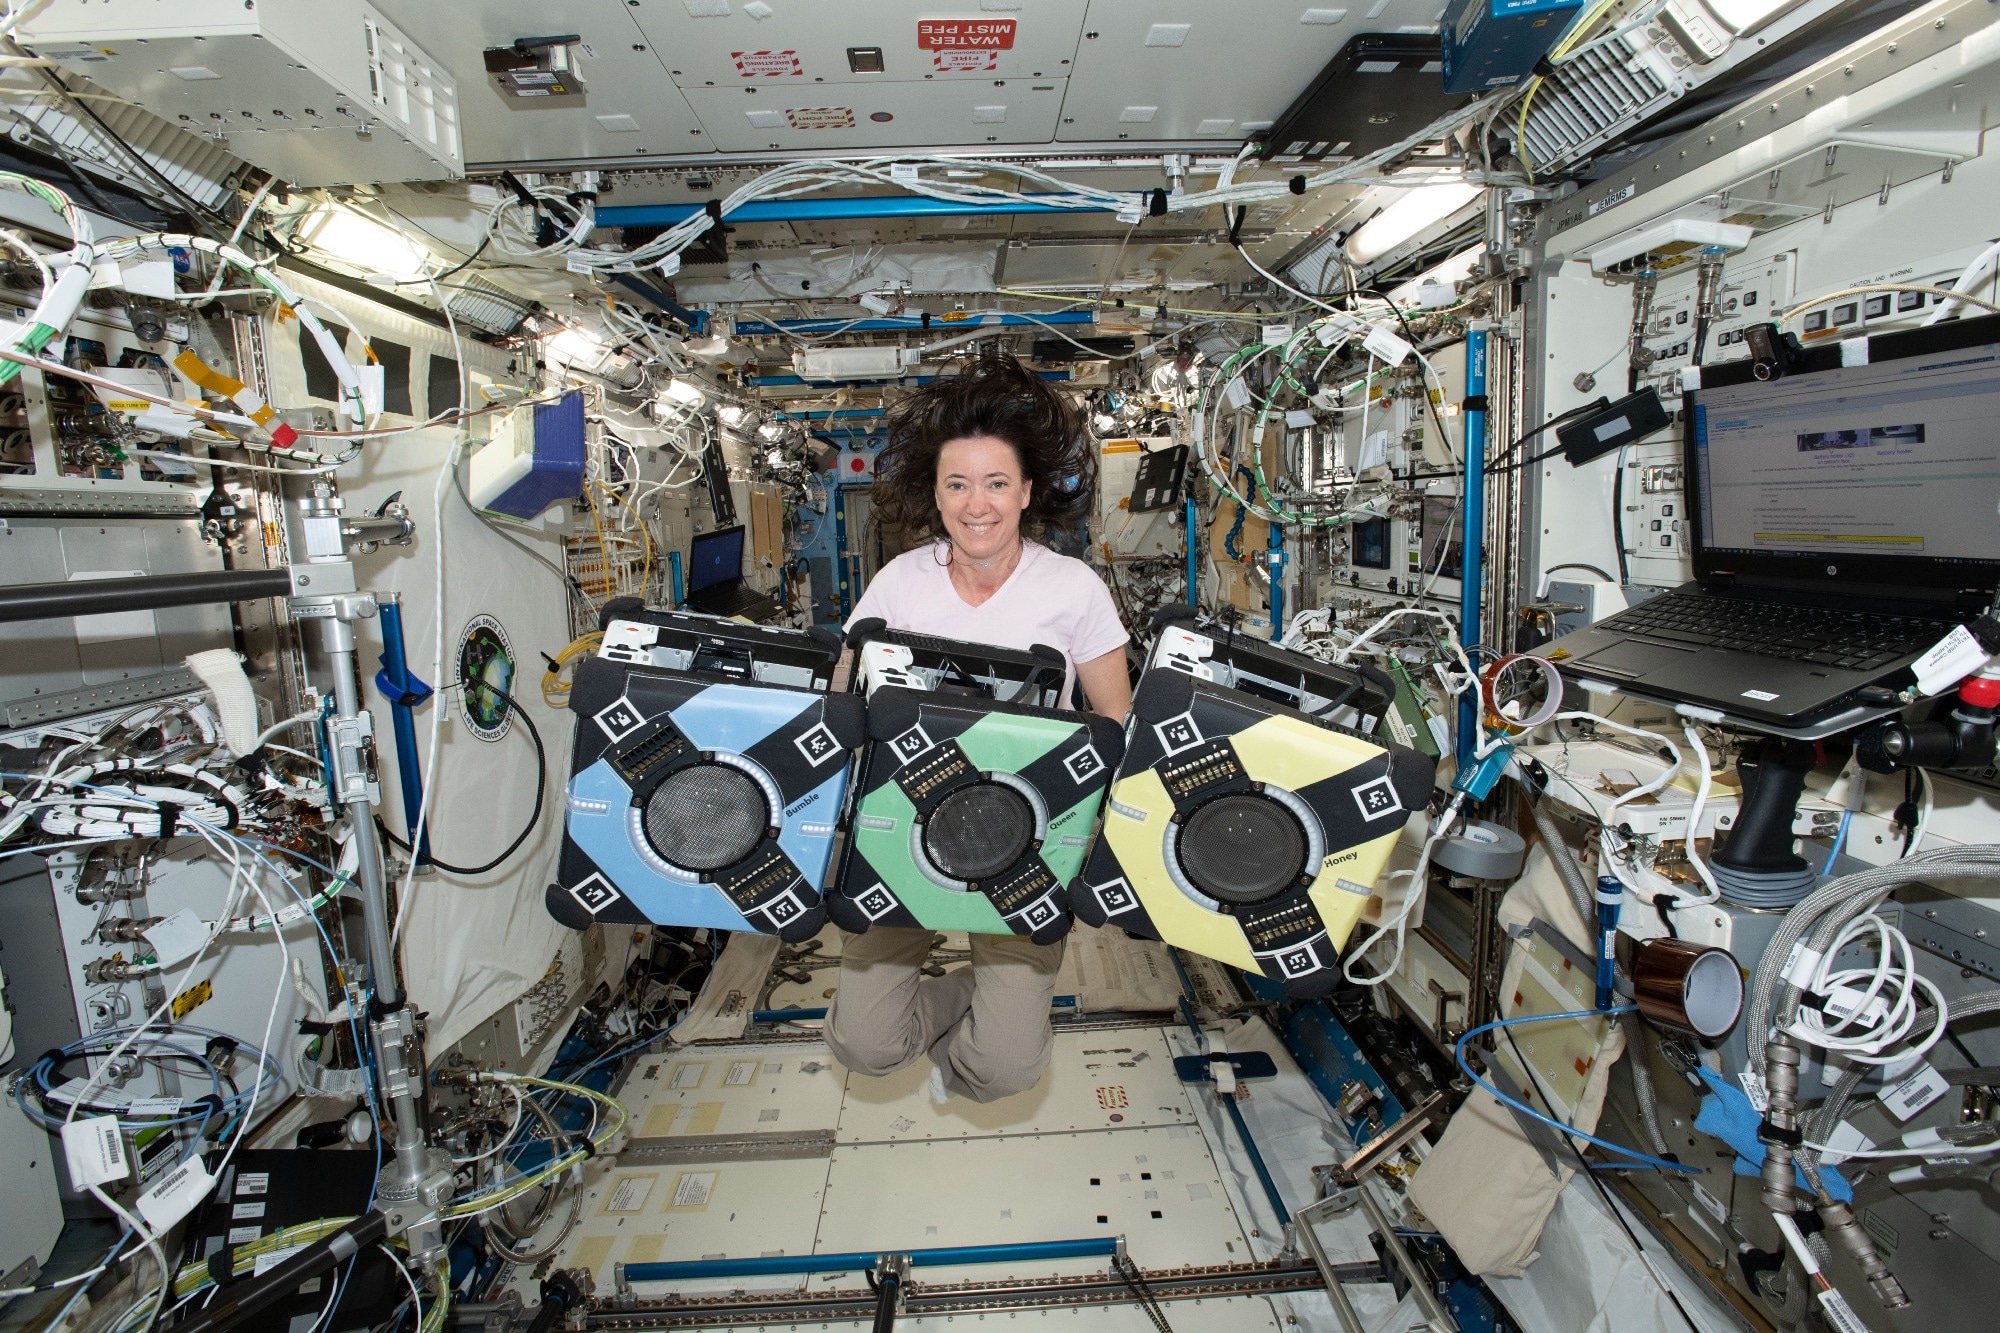 Robotic Helpers Test New Technology on the Space Station - AZoRobotics